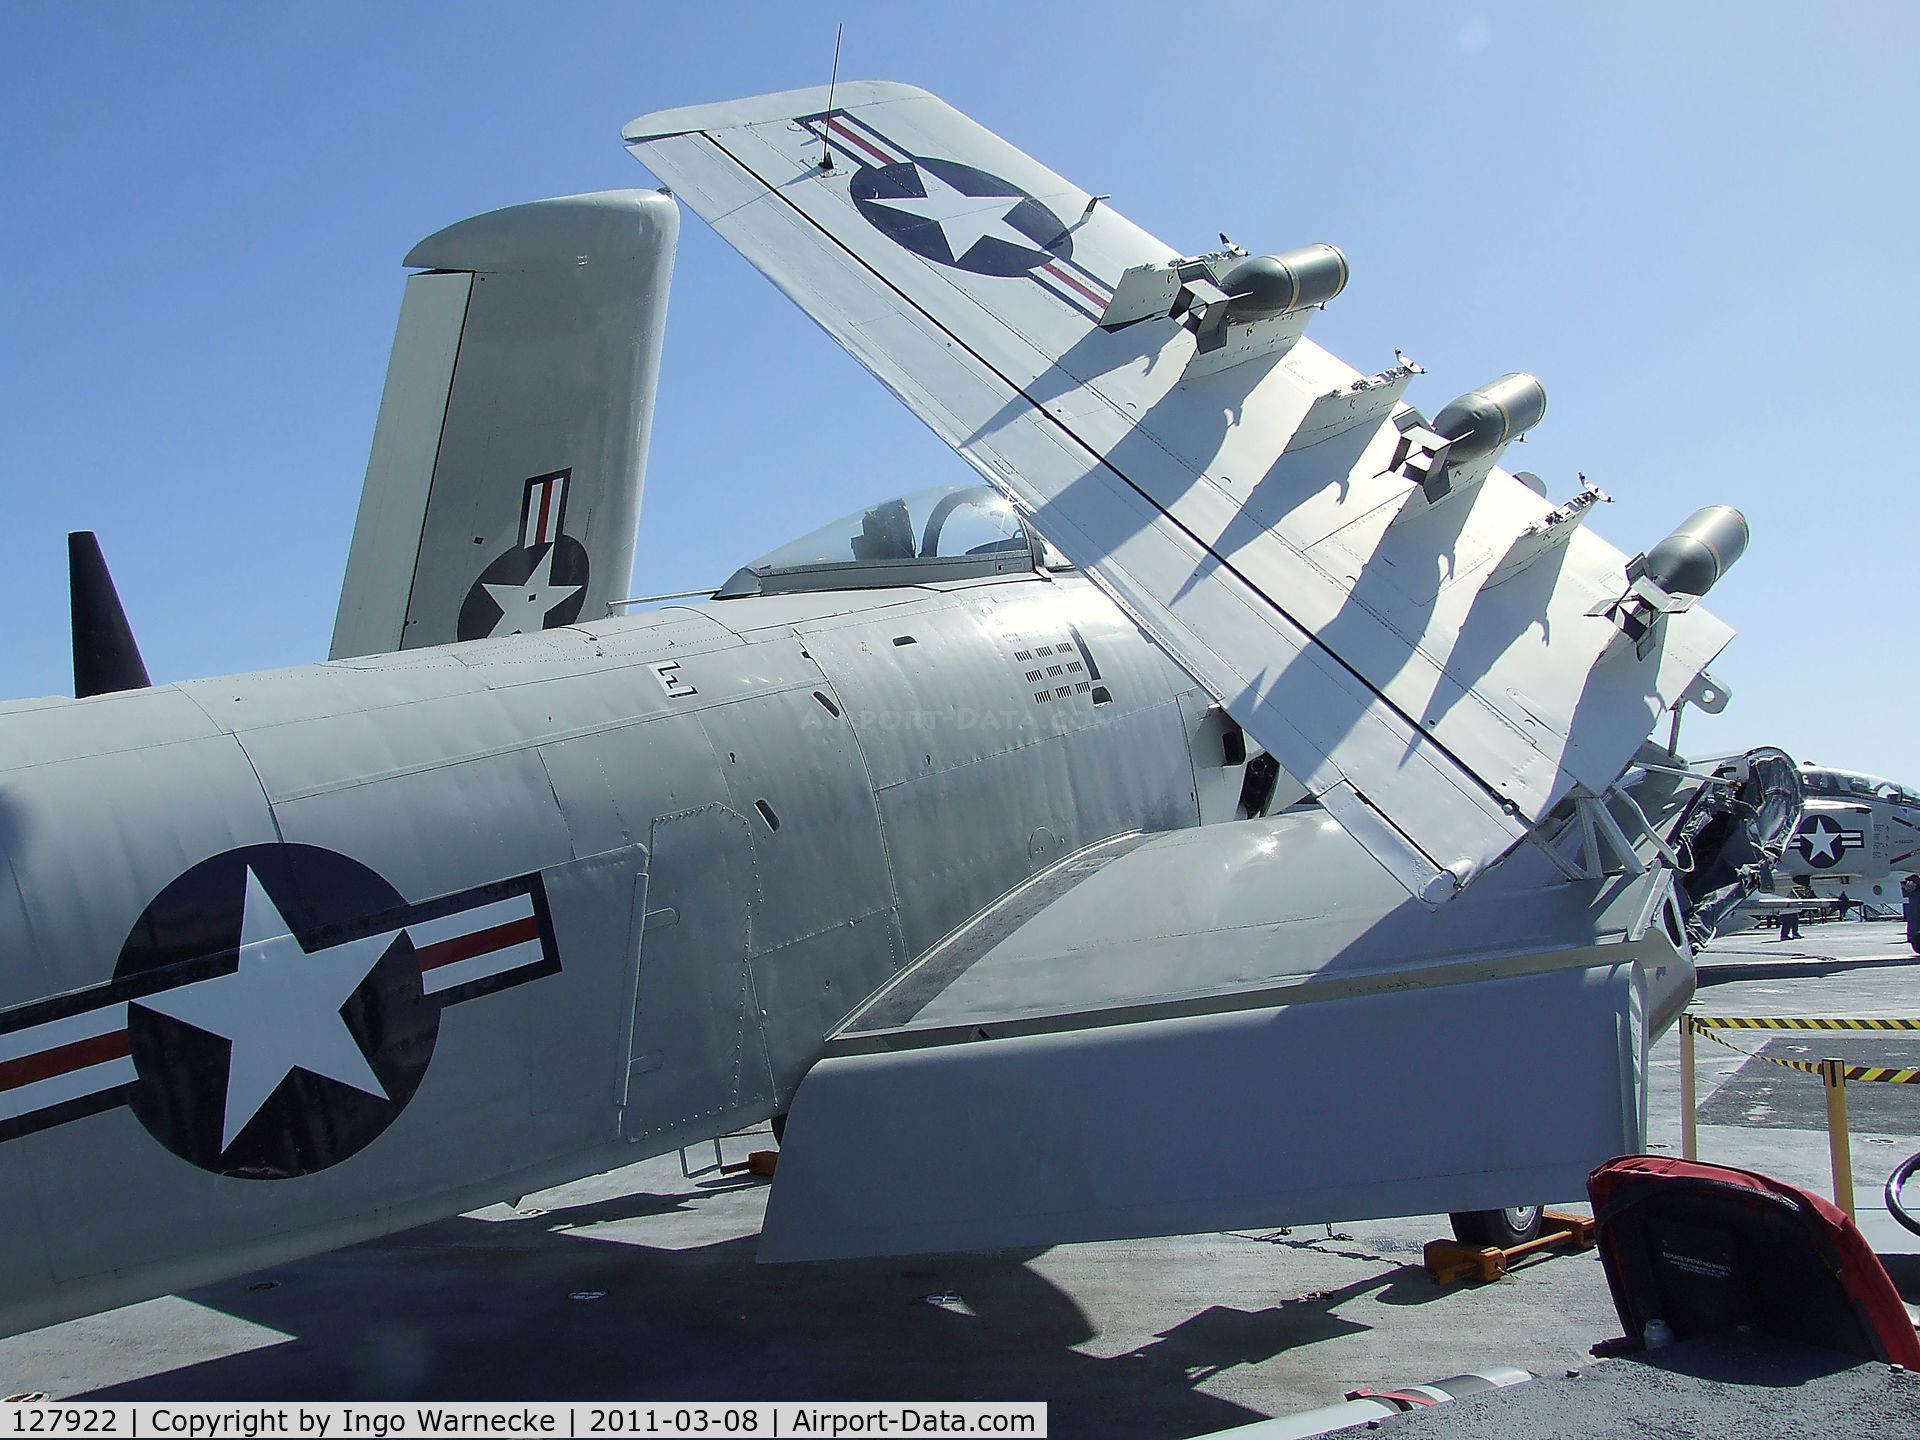 127922, Douglas AD-4W Skyraider C/N 7937, Douglas AD-6 (A-1H) Skyraider - built as AD-4W, then converted to the present shape - on the flight deck of the USS Midway Museum, San Diego CA